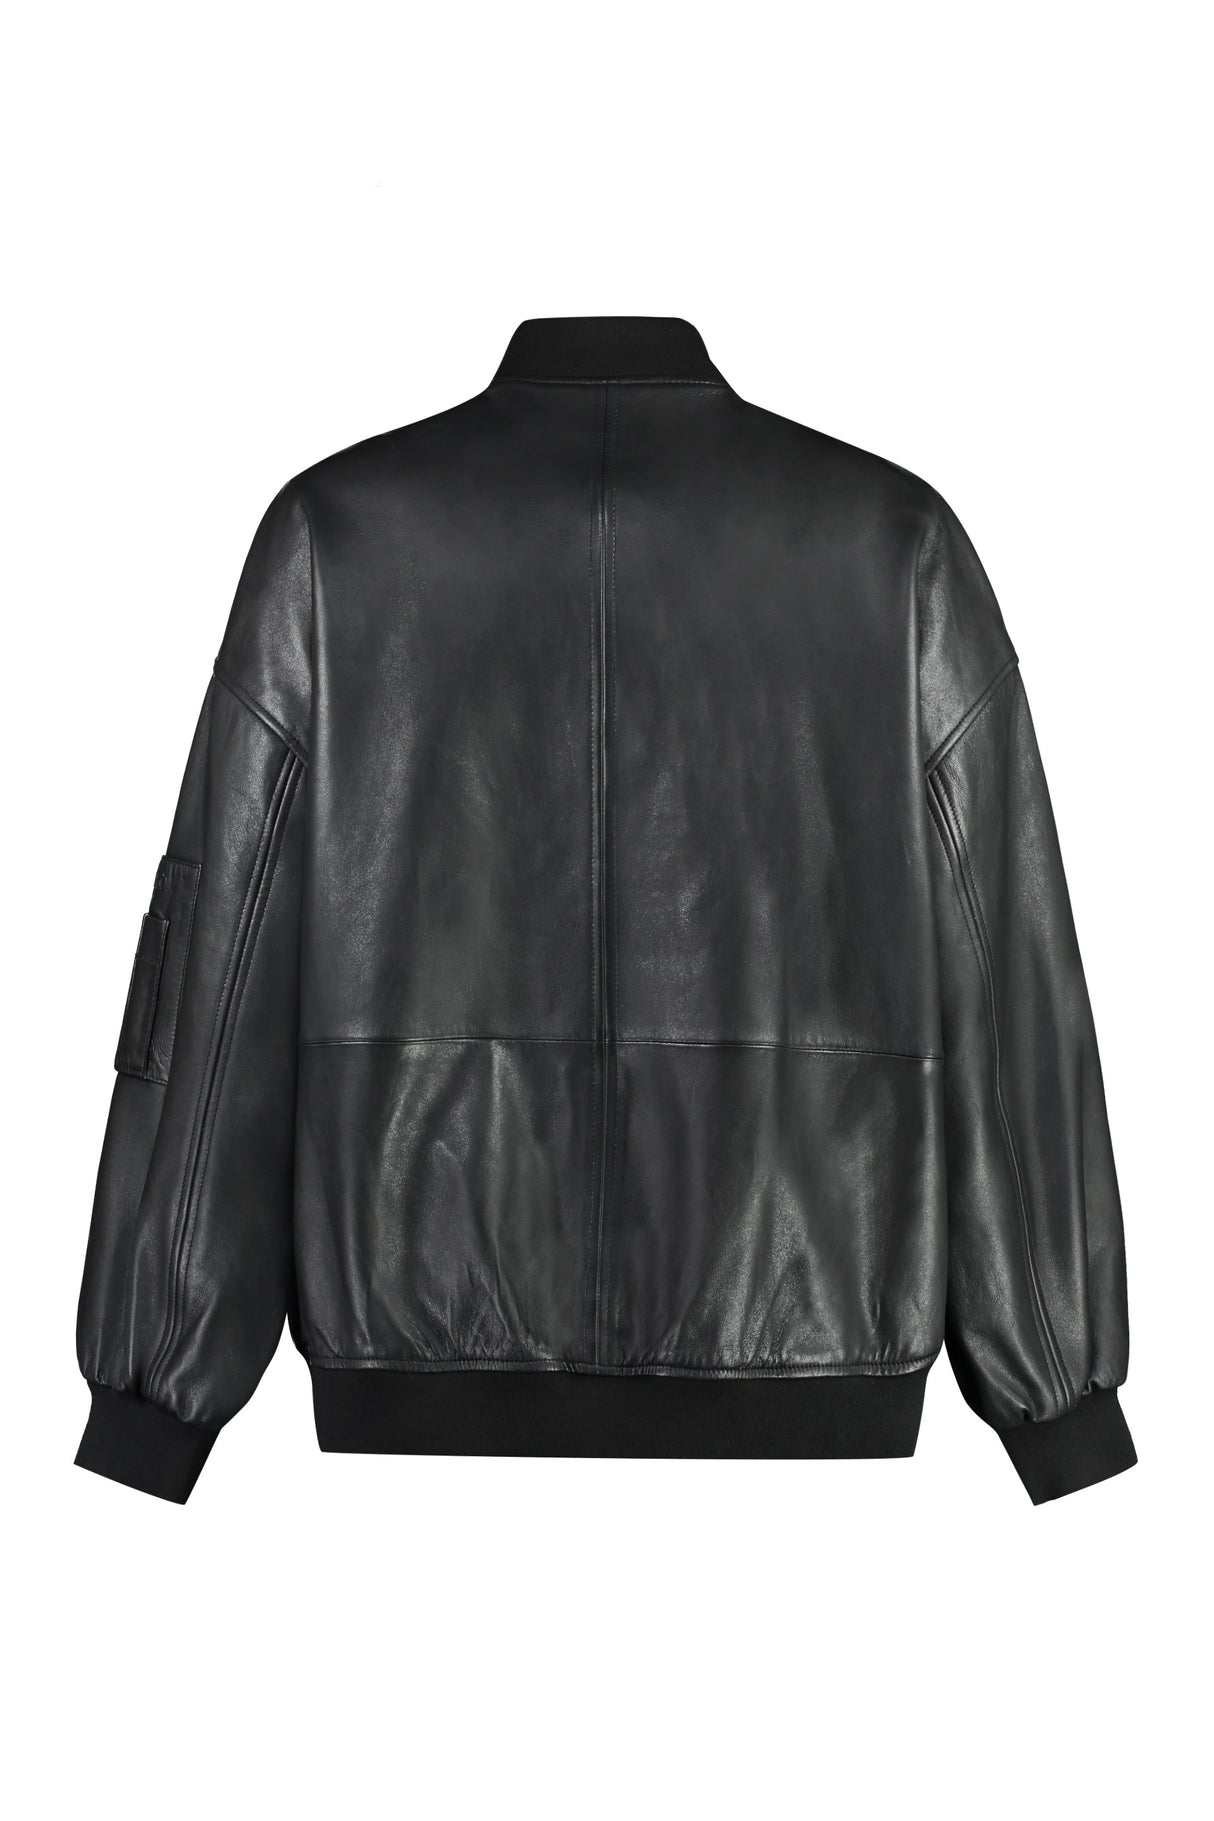 Black Leather Jacket with Zippered Pocket and Ribbed Edges